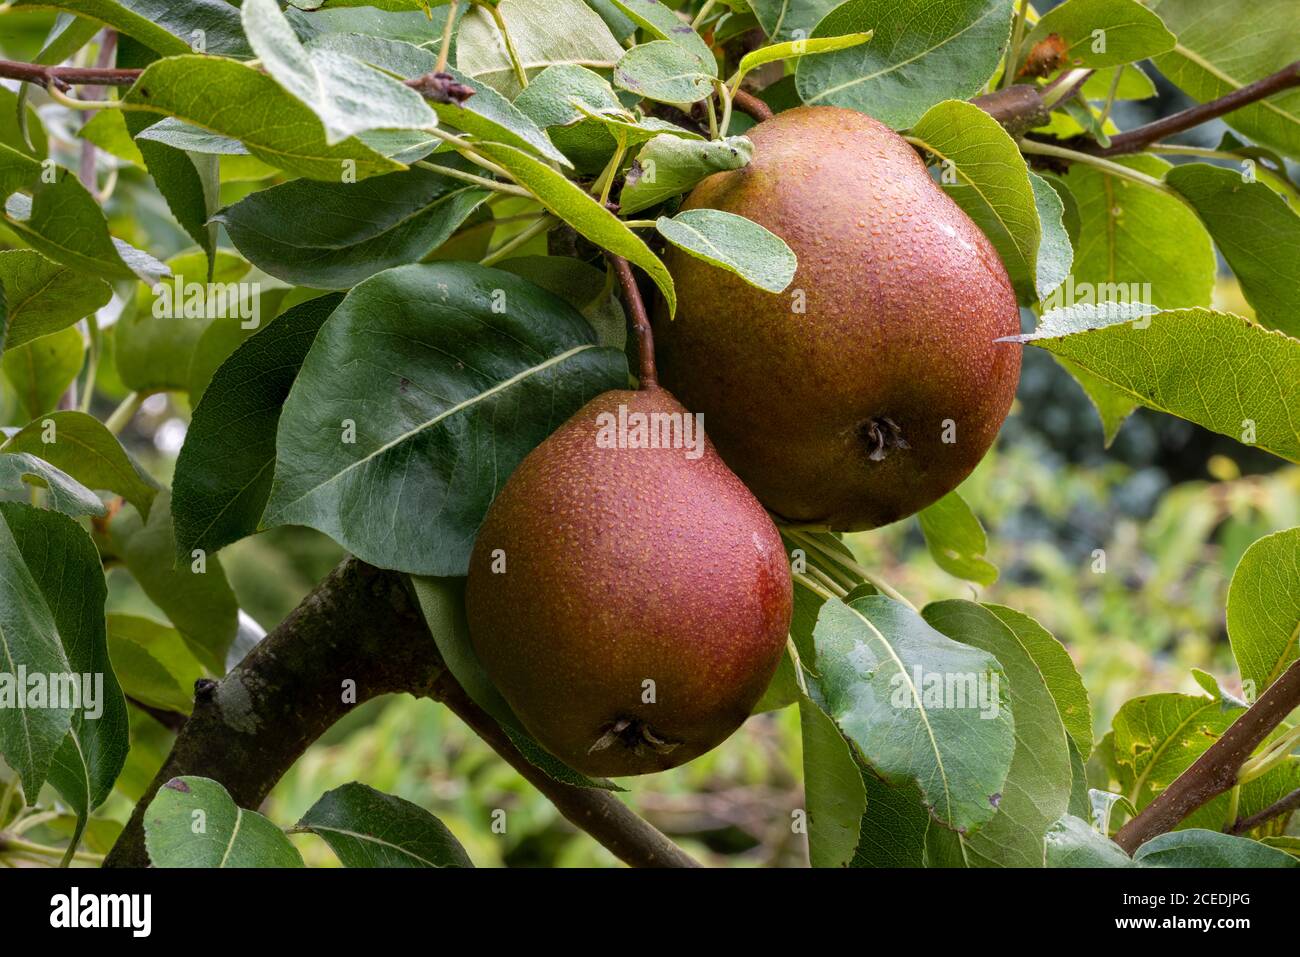 Close up of two, dark red, ripe, Pear 'Black Worcester' fruits (Pyrus communis 'Black Worcester') hanging close together on tree branch. Stock Photo